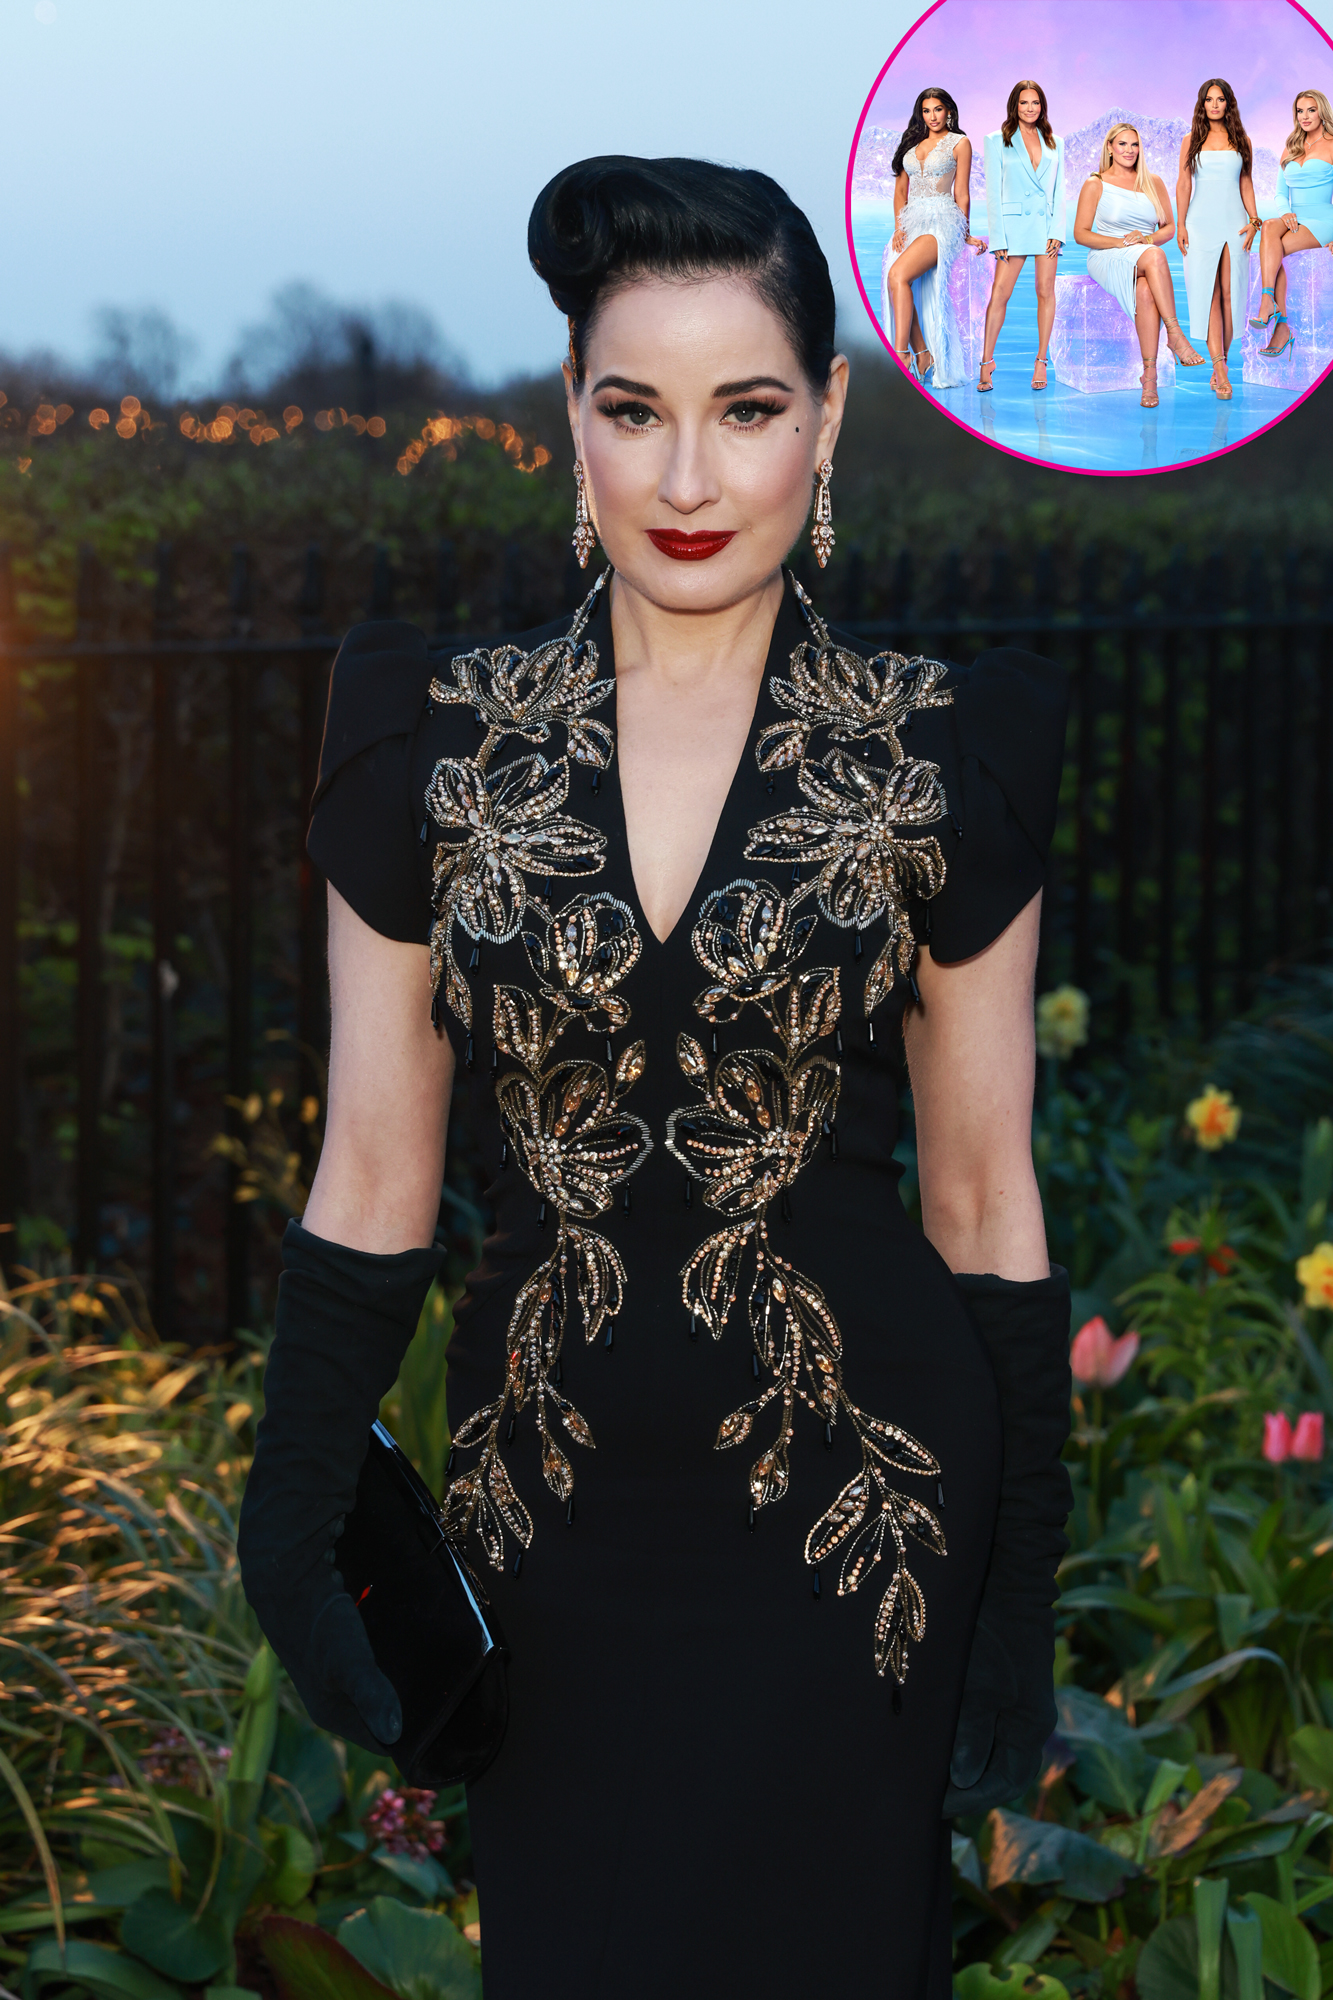 What Is Dita Von Teese's Real Name?